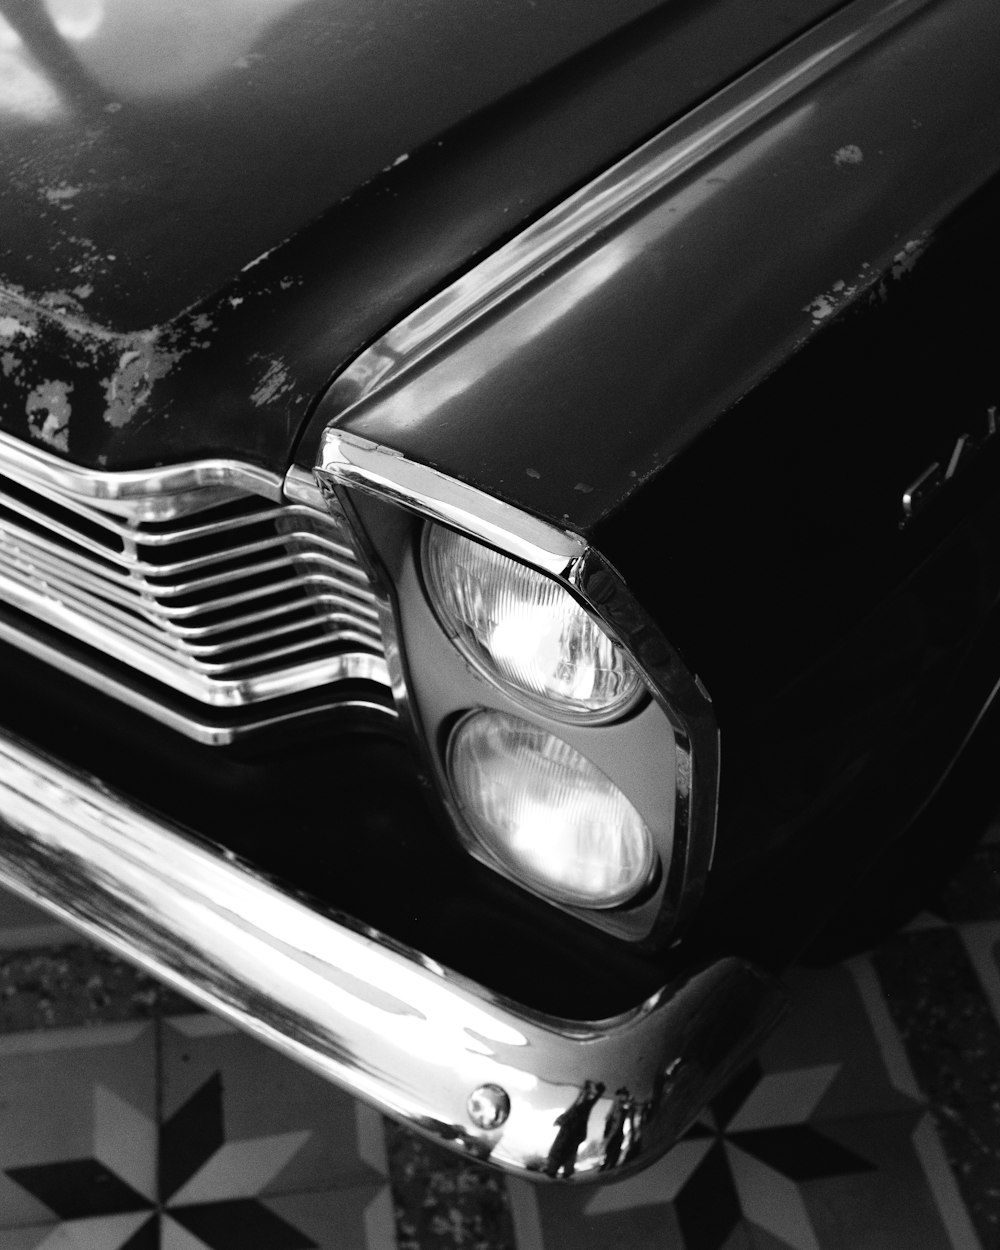 a black and white photo of an old car